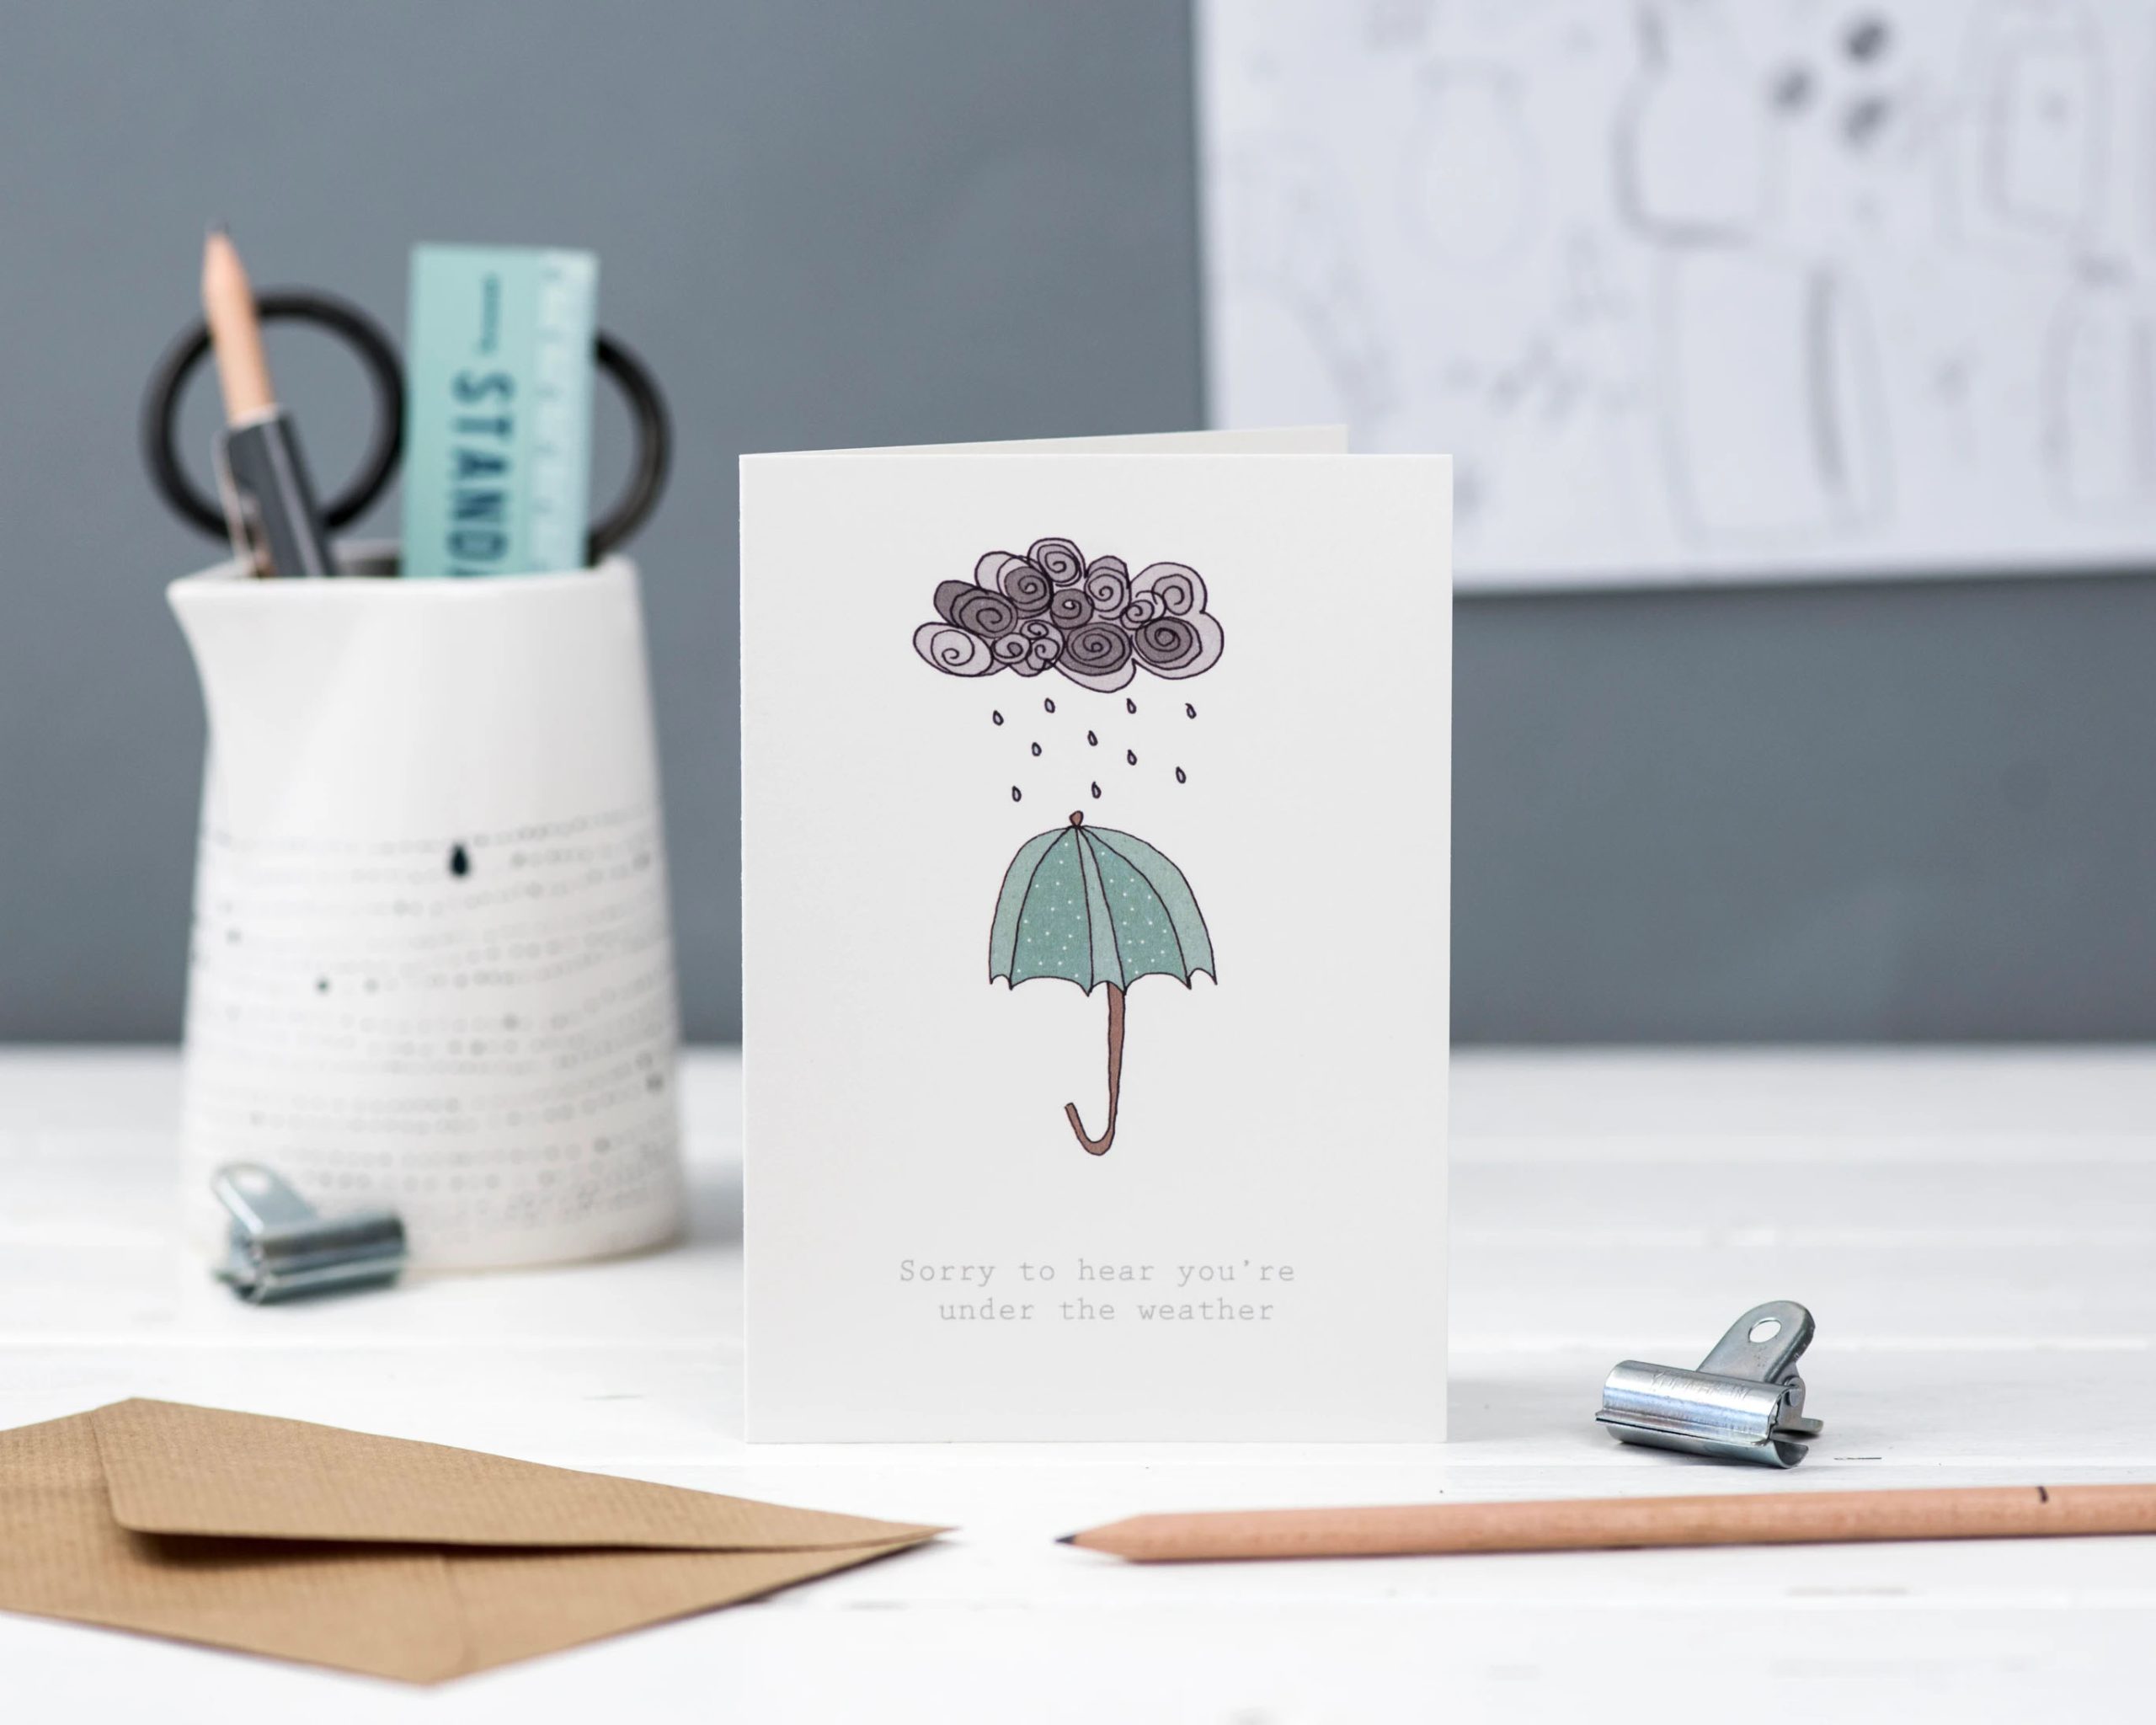 Get well soon greeting card with hand illustrated cloud raining on illustrated umbrella with text sorry to hear you're under the weather